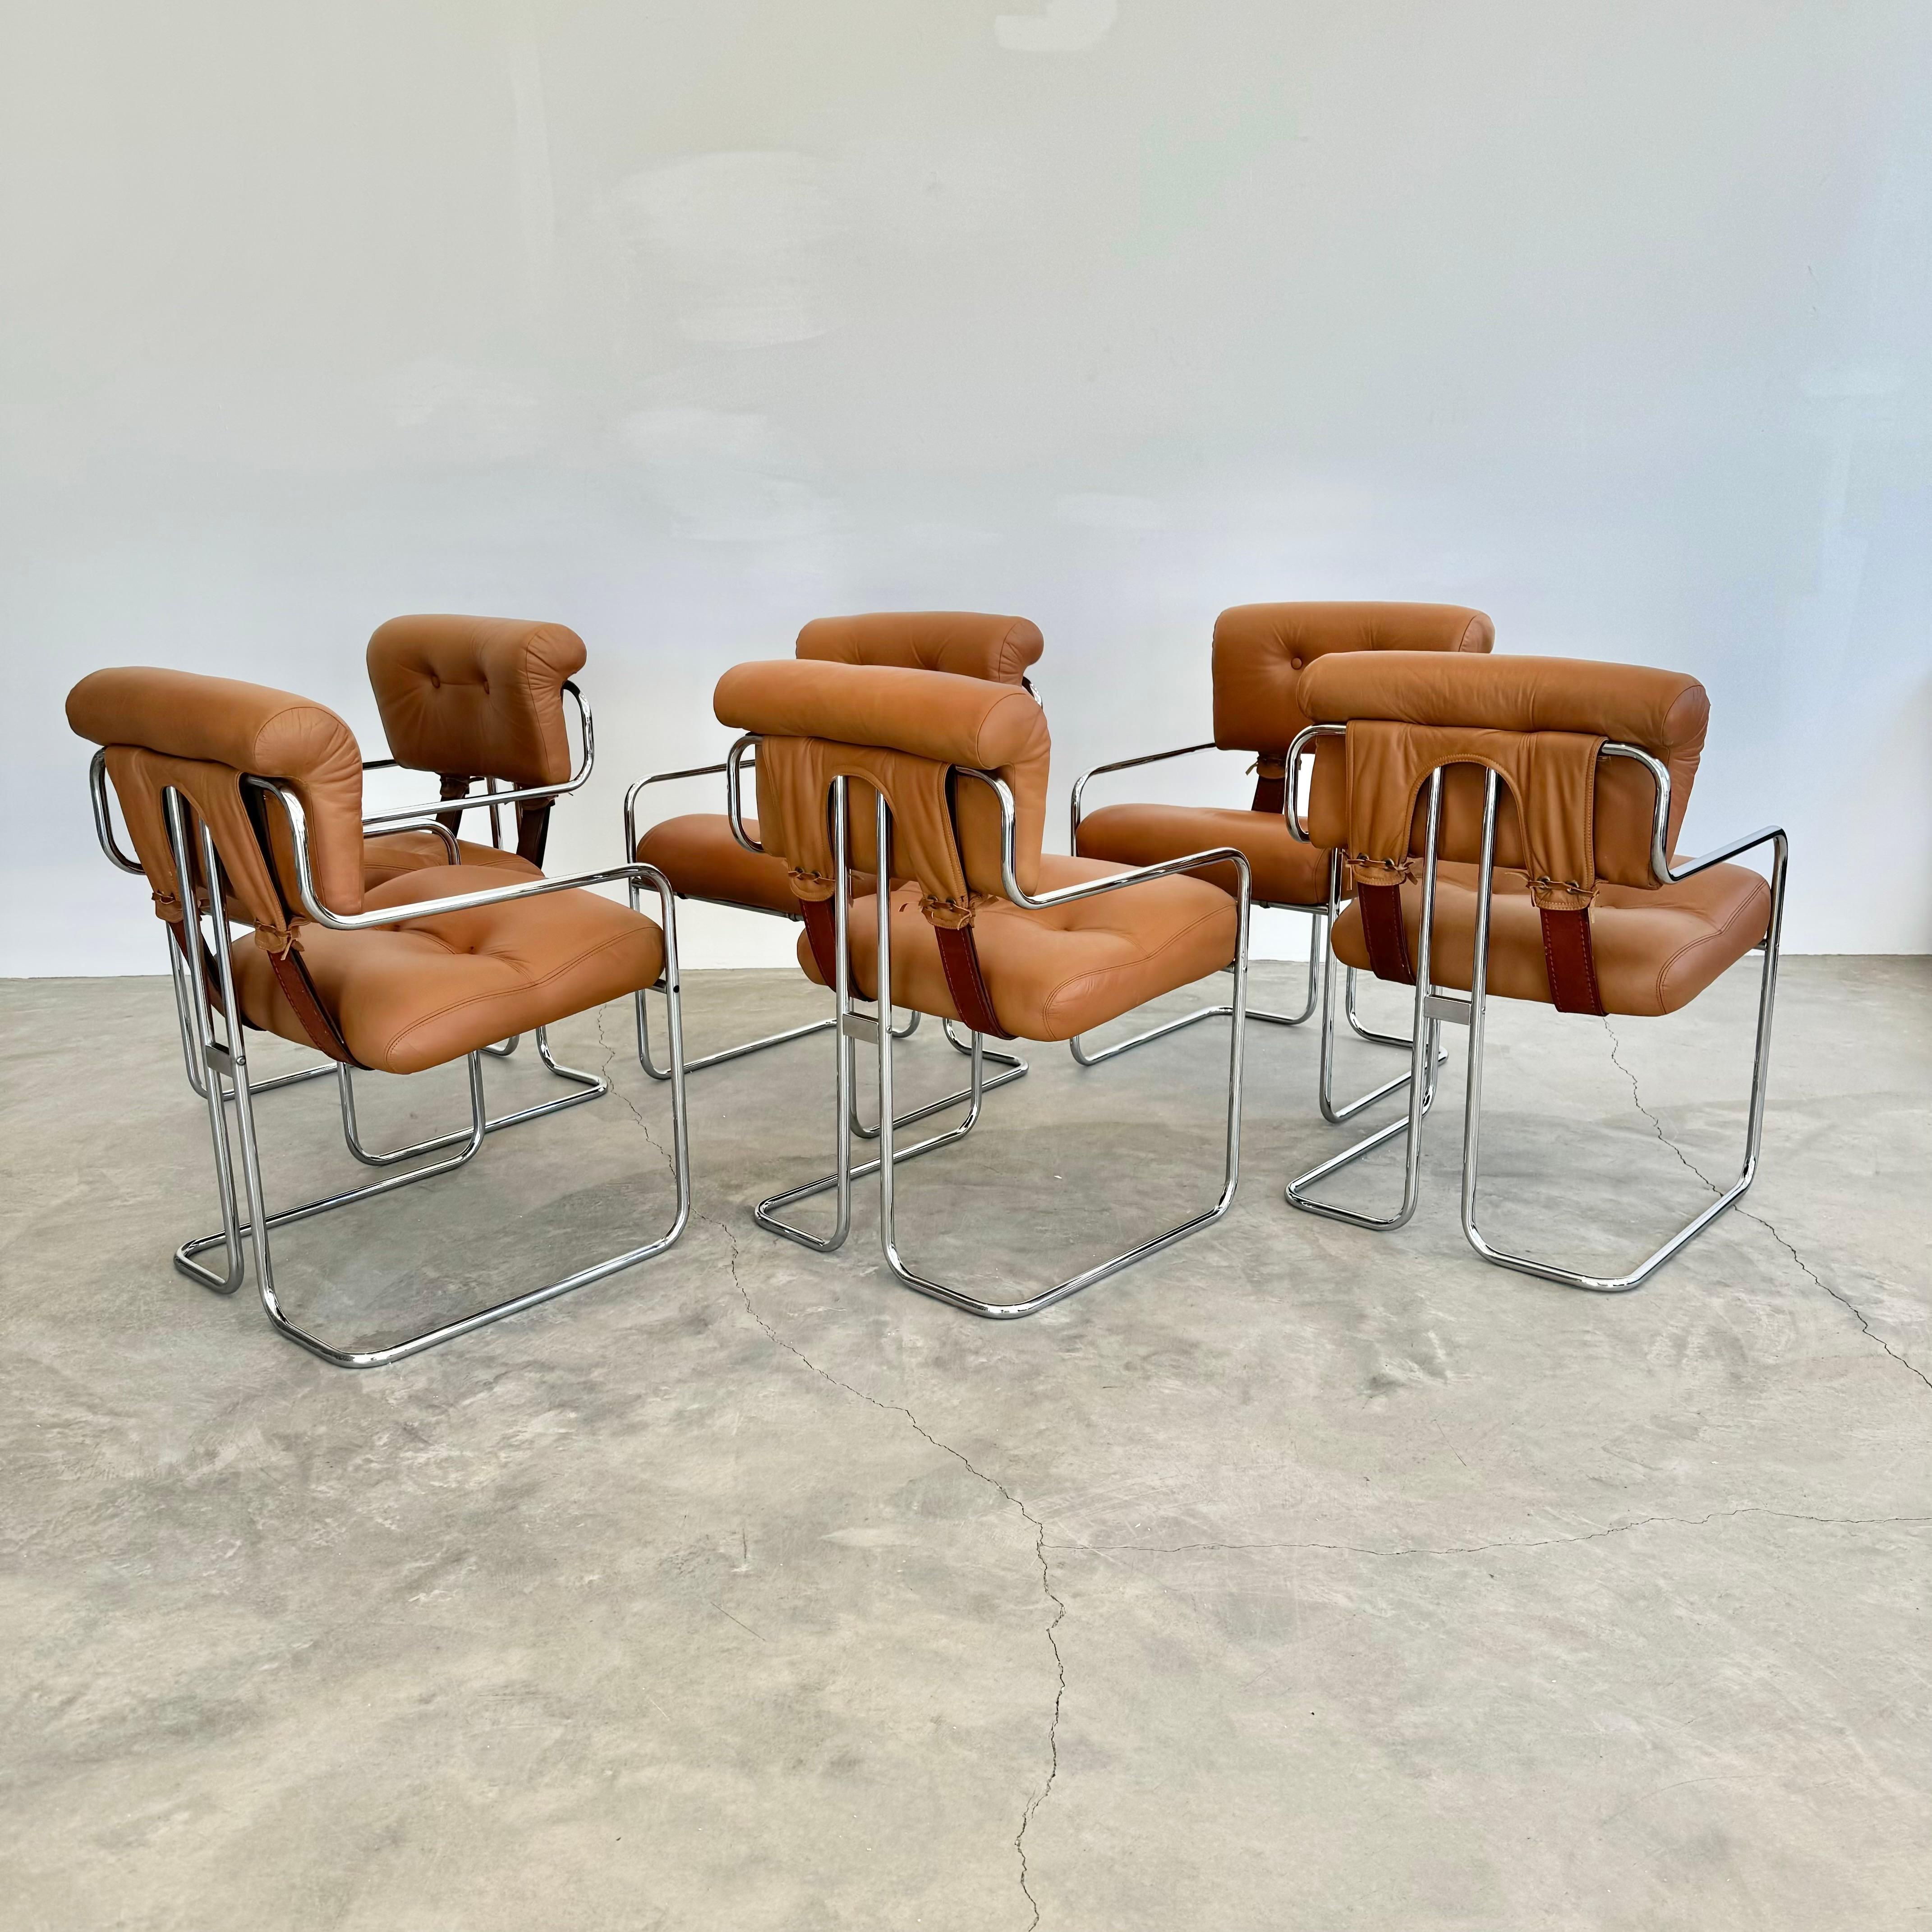 Set of 6 'Tucroma' Chairs in Tan by Guido Faleschini, 1970s Italy For Sale 3